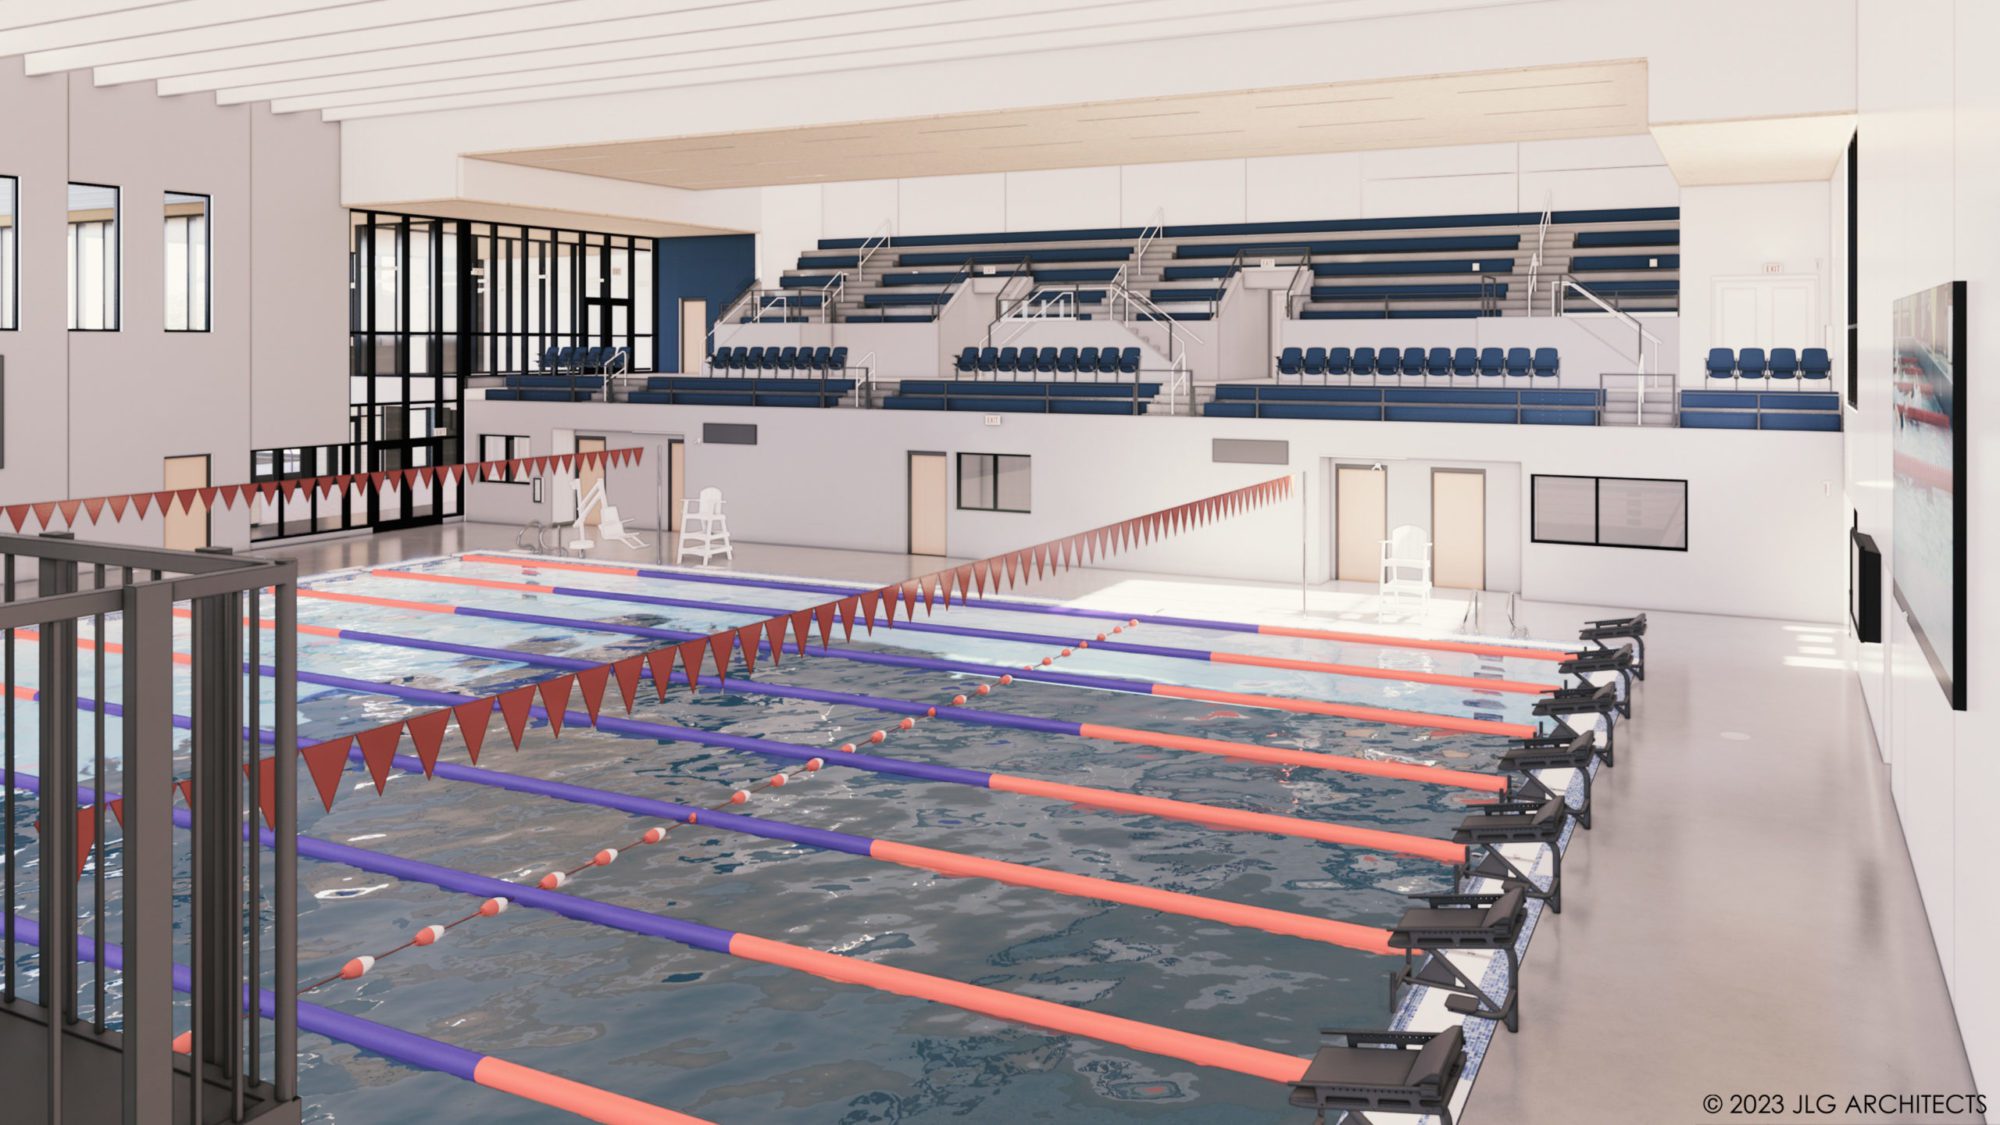 An interior rendering of the Rice Lake Aquatics Center provided by JLG Architects.